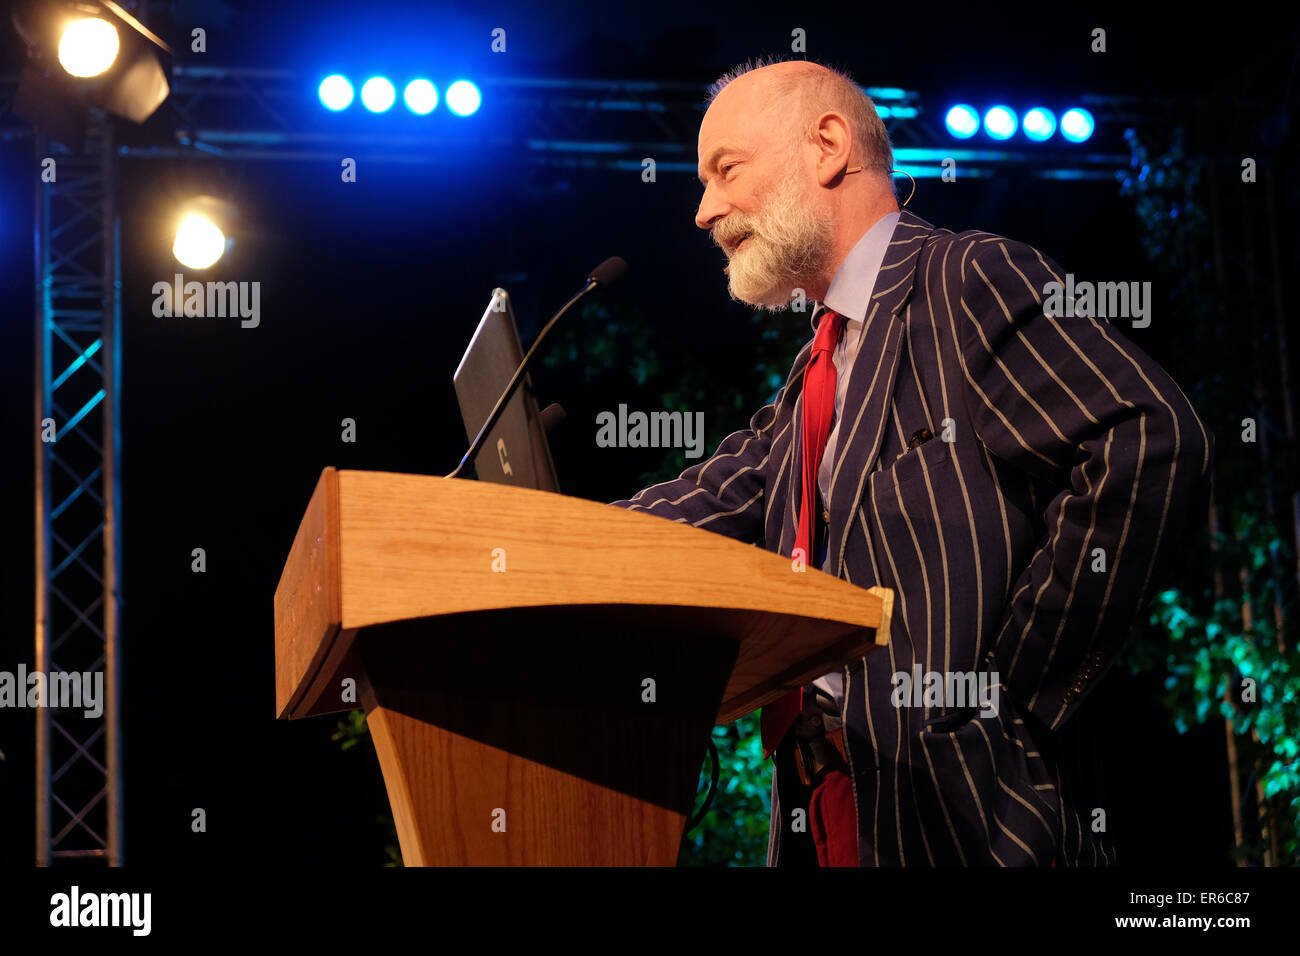 Hay Festival, Powys, Wales - May 2015  -  Author Raymond Tallis talks on stage about his latest book The Black Mirror - Fragments of an Obituary for Life. Stock Photo